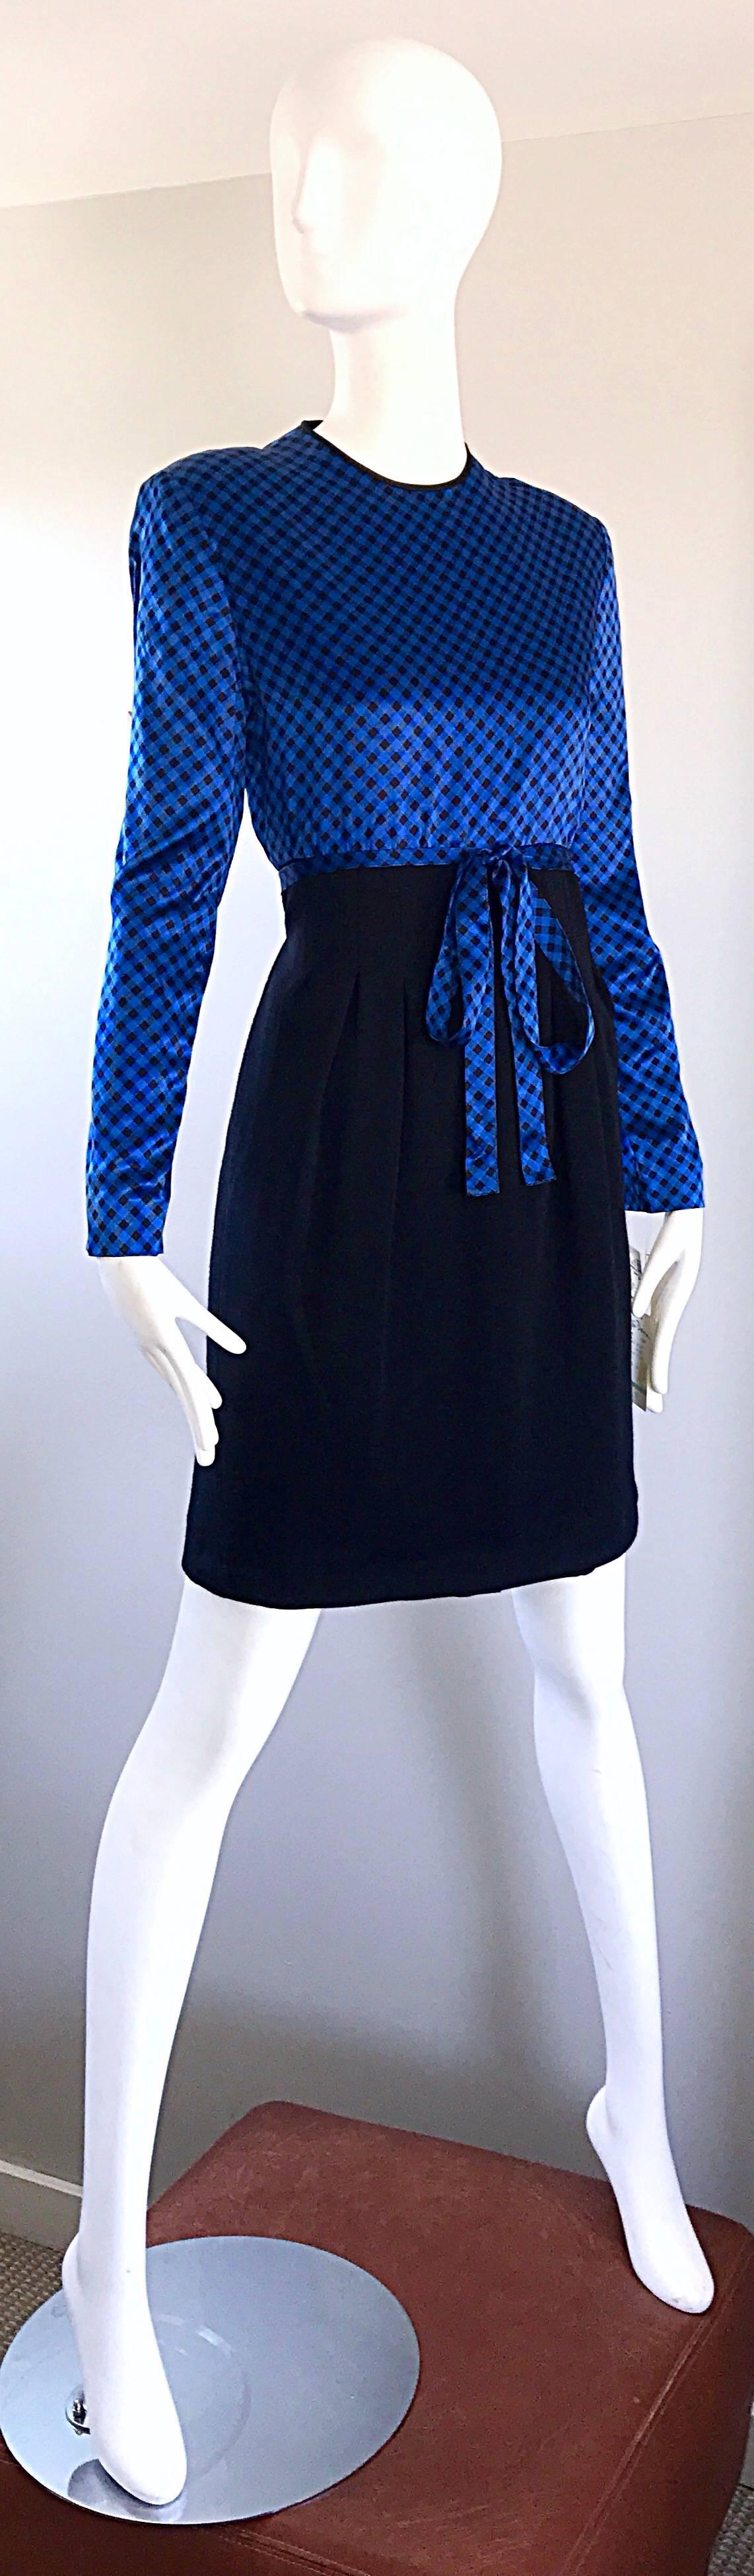 NWT 1990s Geoffrey Beene Size 10 Royal Blue Black Gingham Long Sleeve Dress For Sale 1